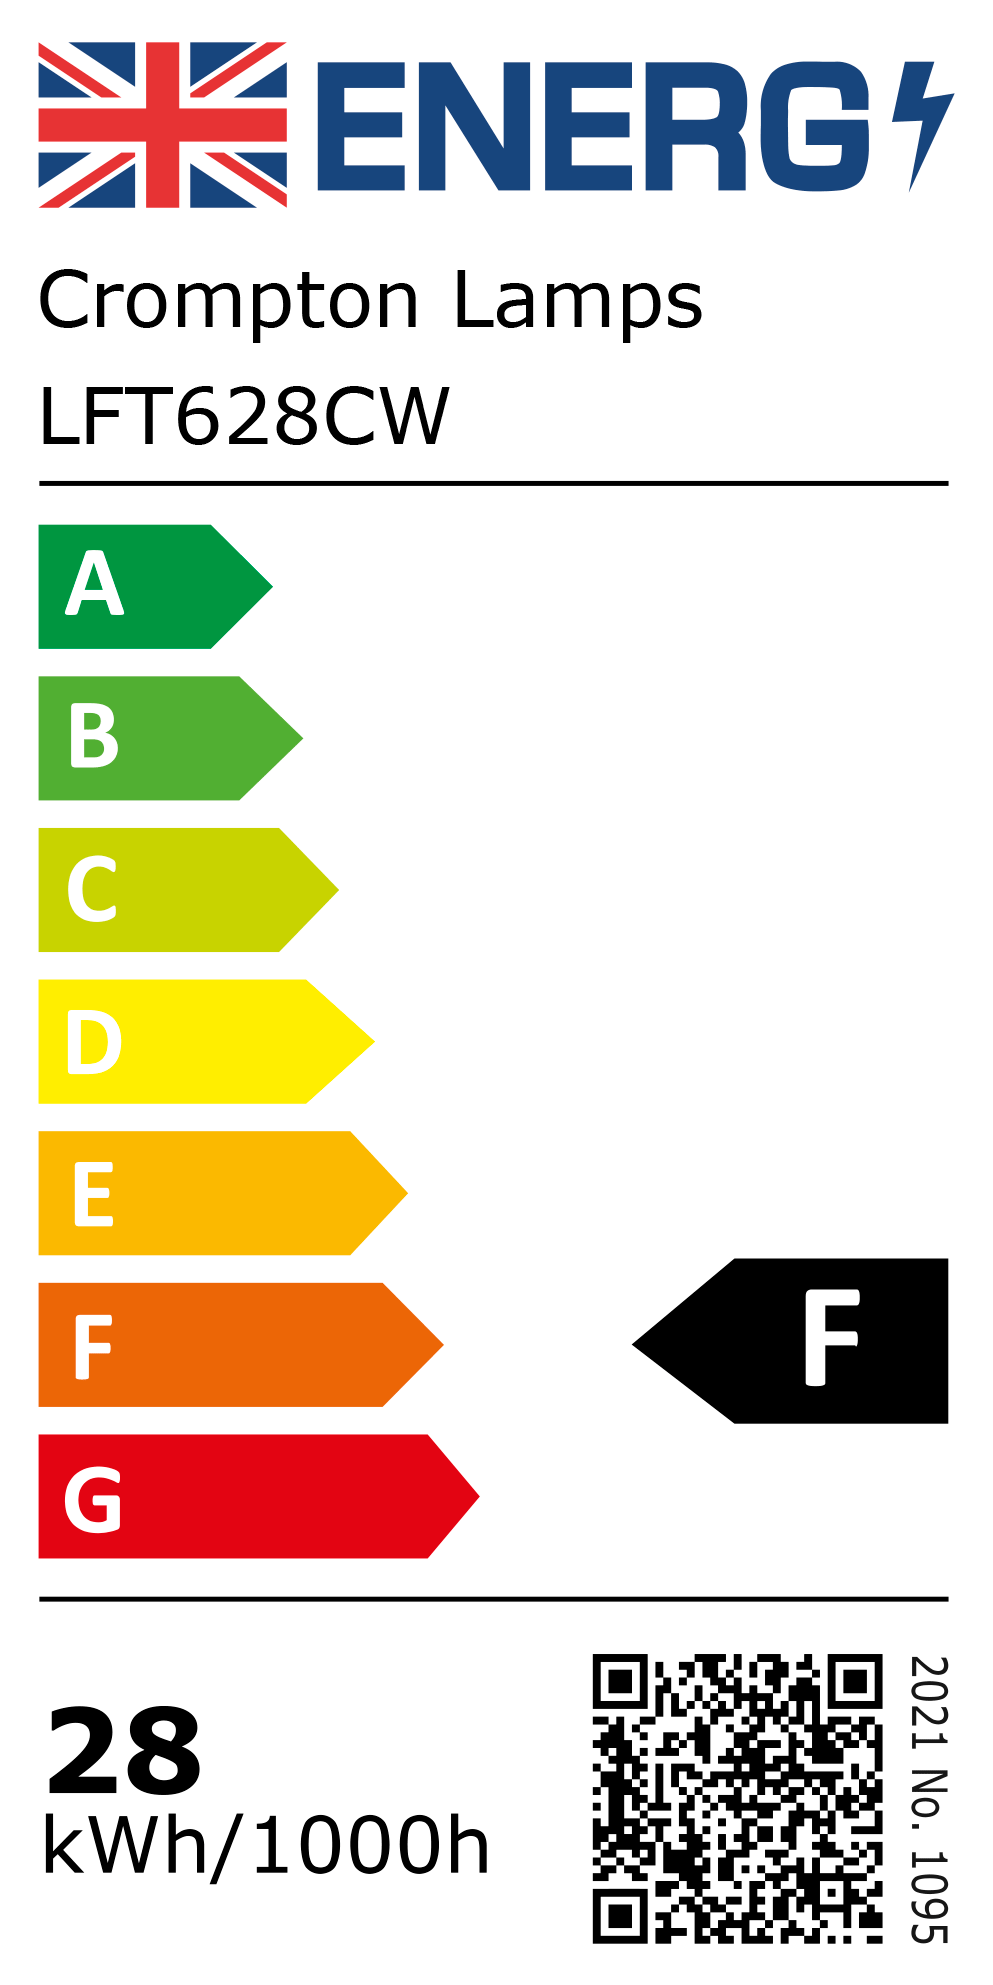 New 2021 Energy Rating Label: Stock Code LFT628CW